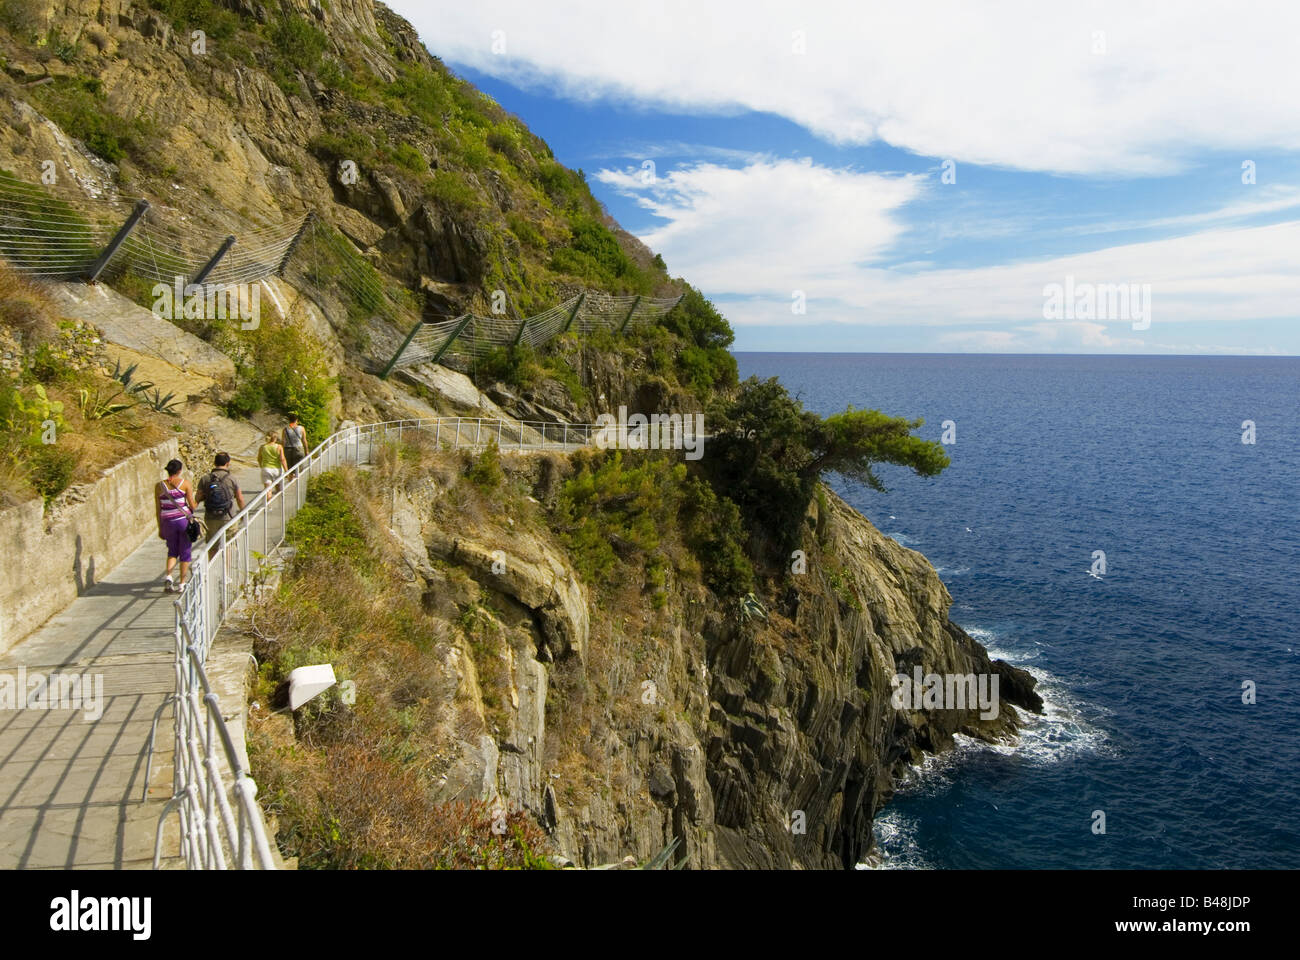 Cliff side walk way connecting the the towns of Riomaggiore and Manarola  Cinque Terre Italy Stock Photo - Alamy